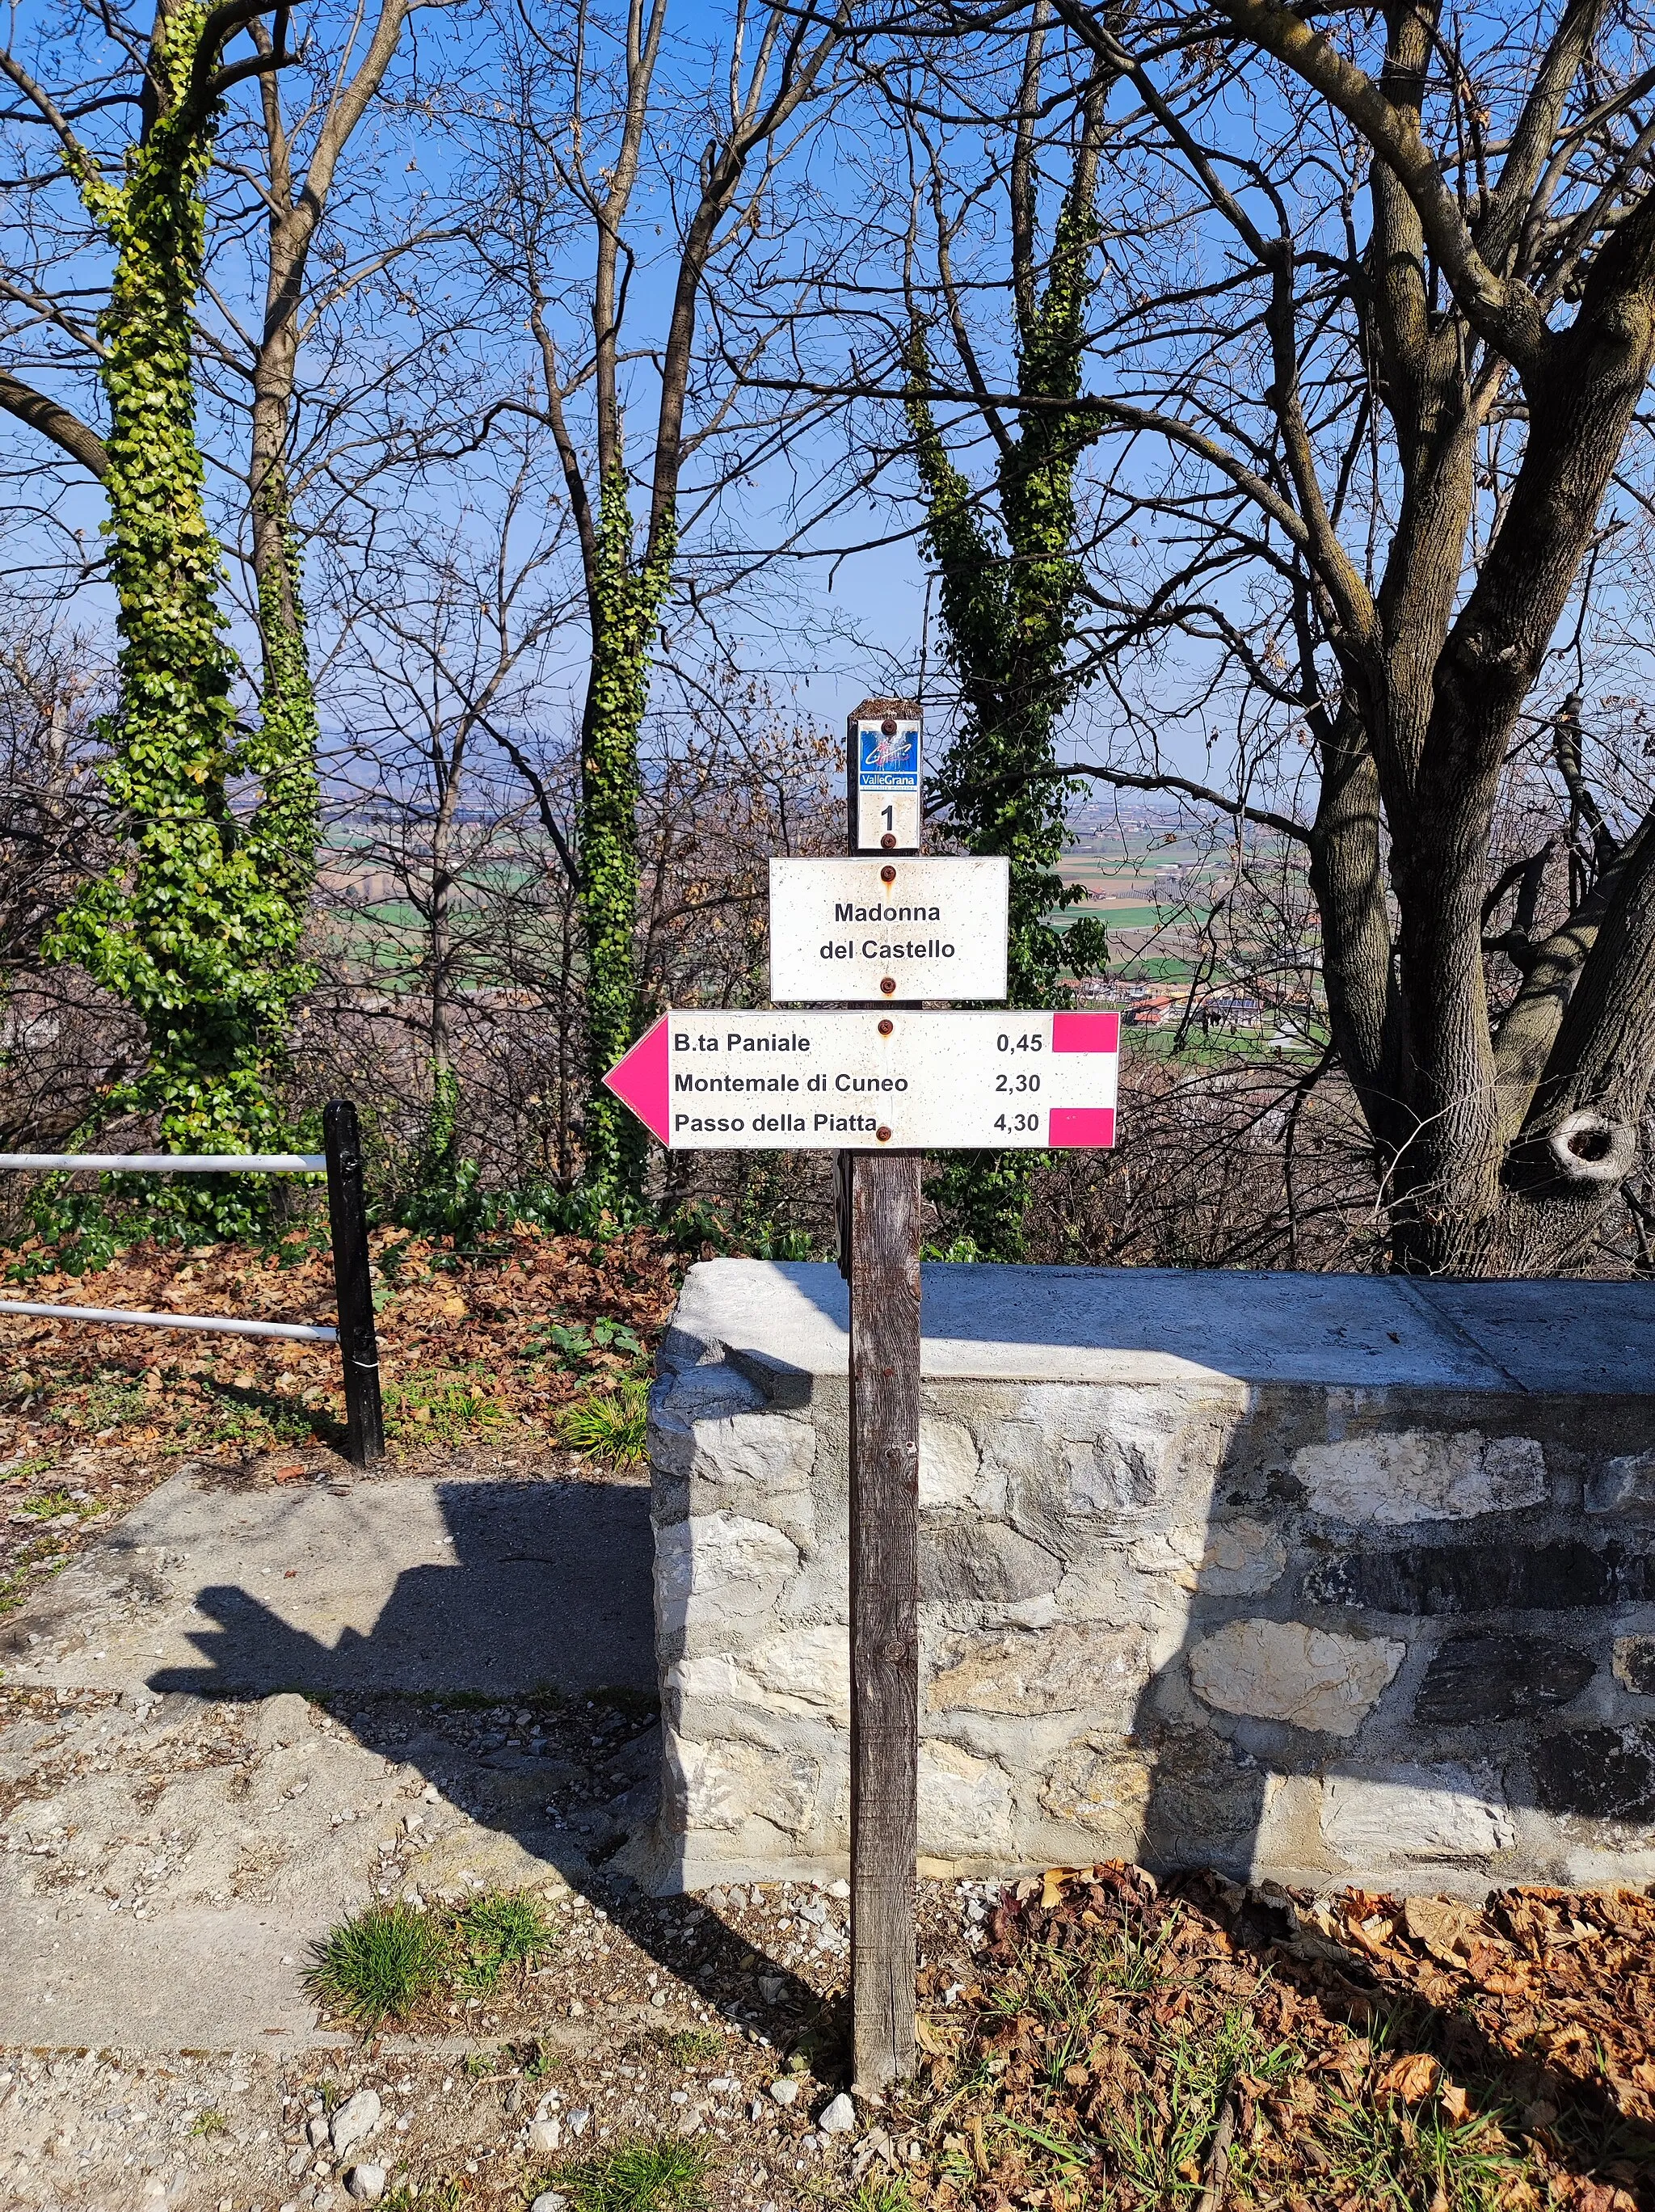 Photo showing: Guidepost in Caraglio, Italy